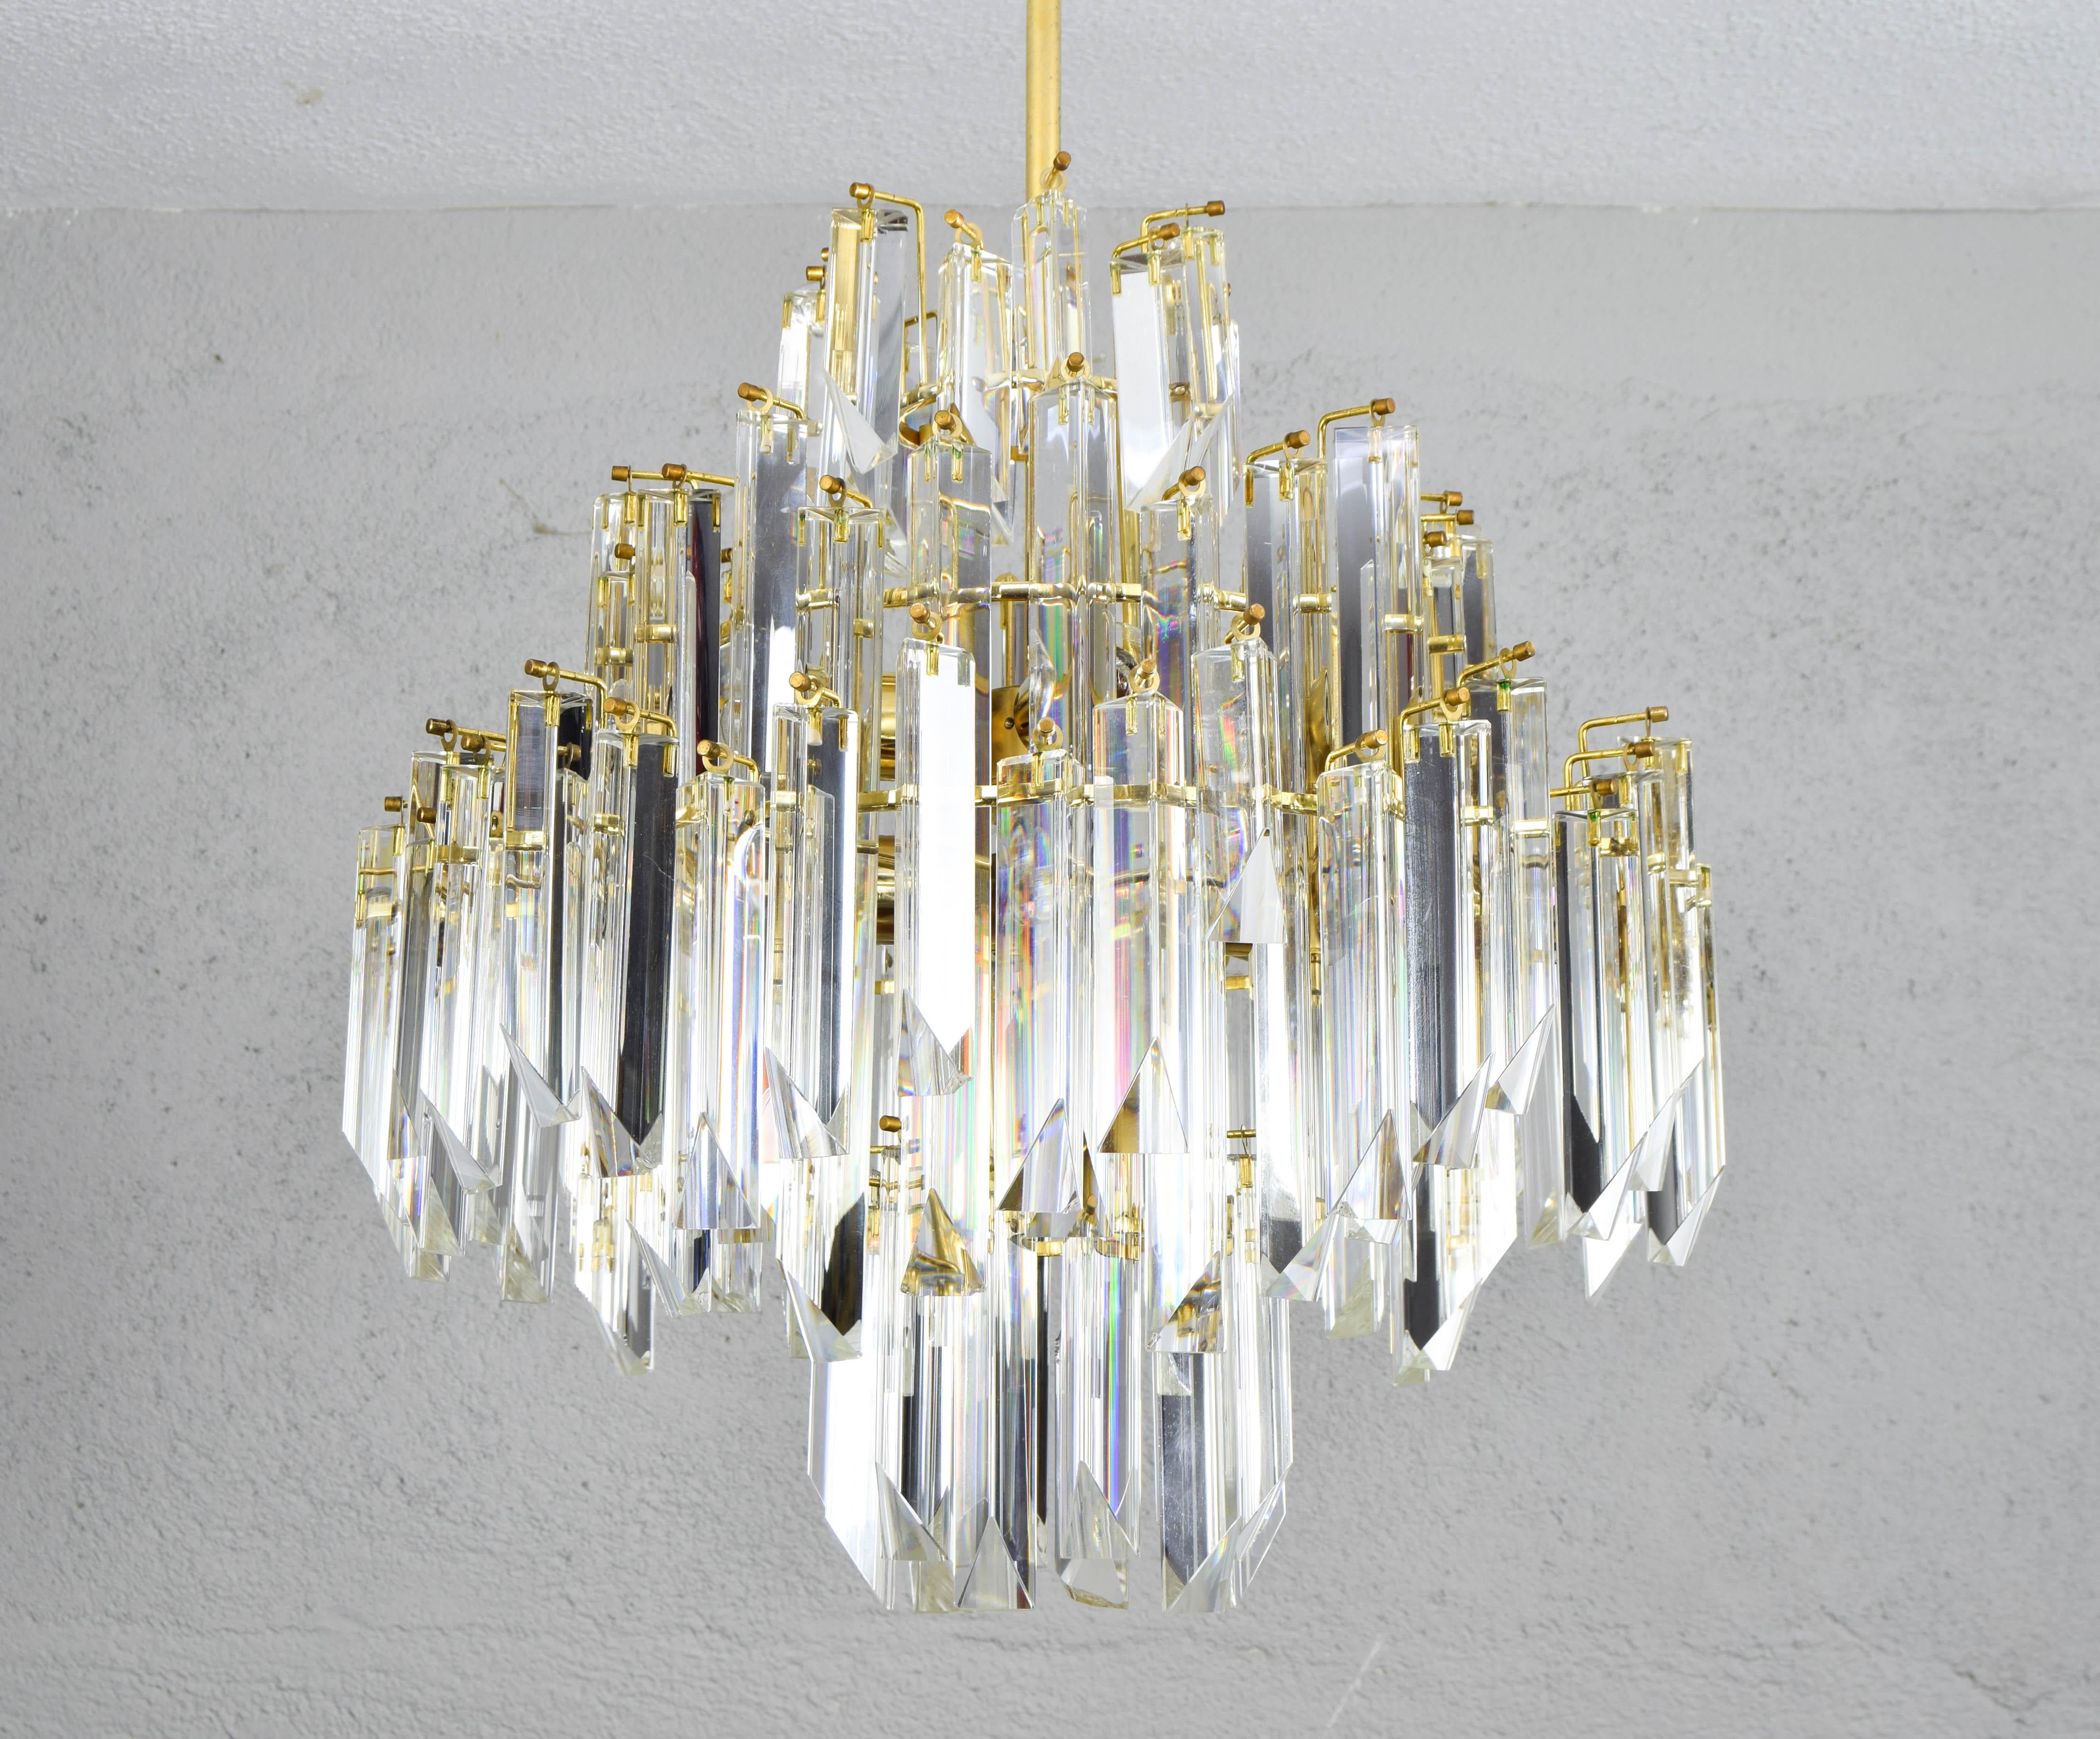 Large Italian chandelier by Venini.
This large piece is composed of a four-story brass-plated steel structure, eight light sources with E27 bulbs and beautiful high-quality Murano 